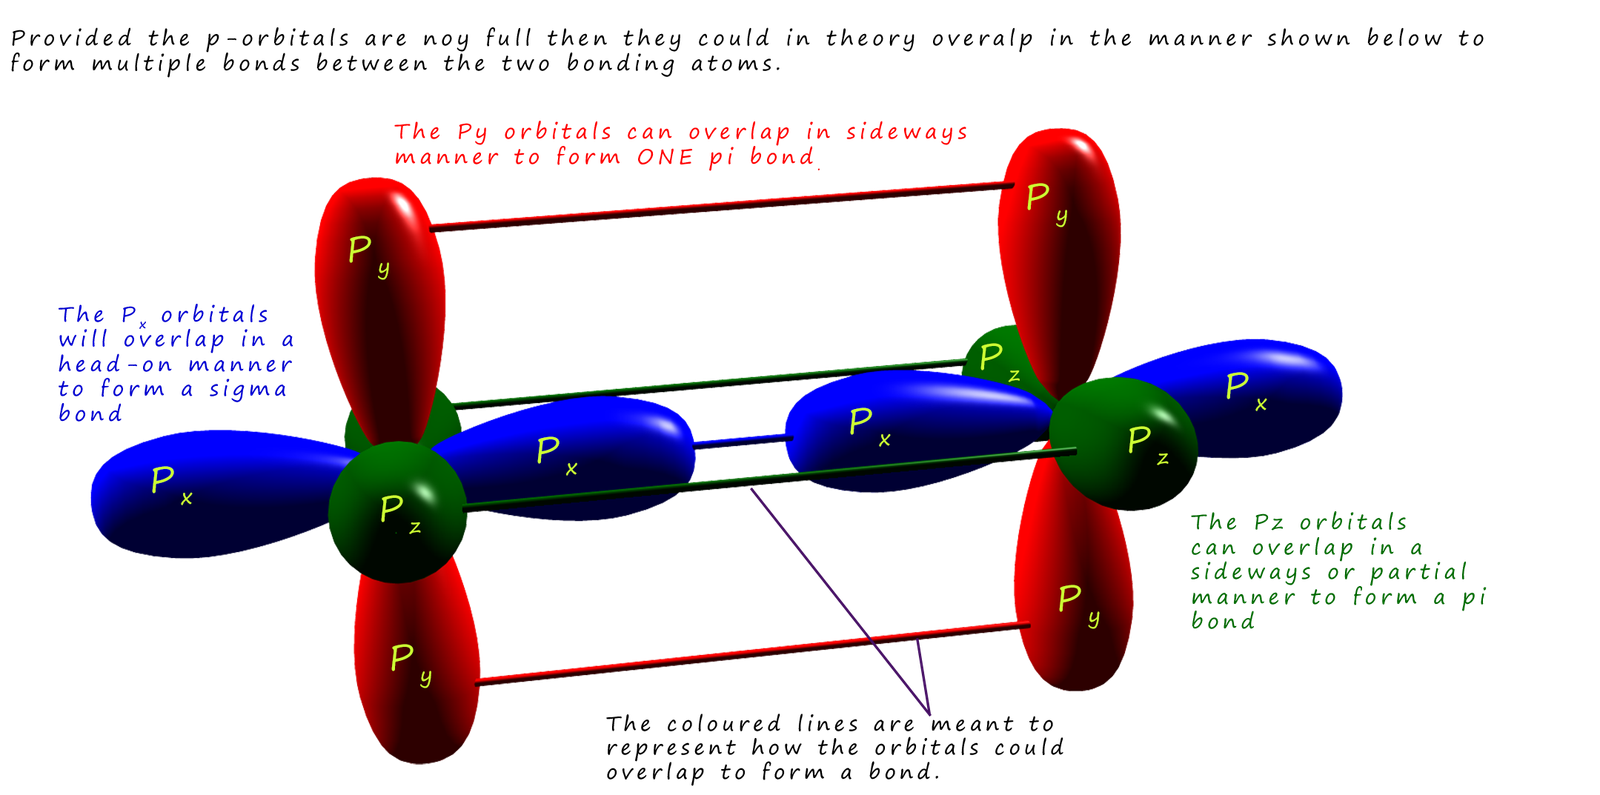 3d model showing how covalent bonds in molecules are a mixture of sigma and pi bonds.